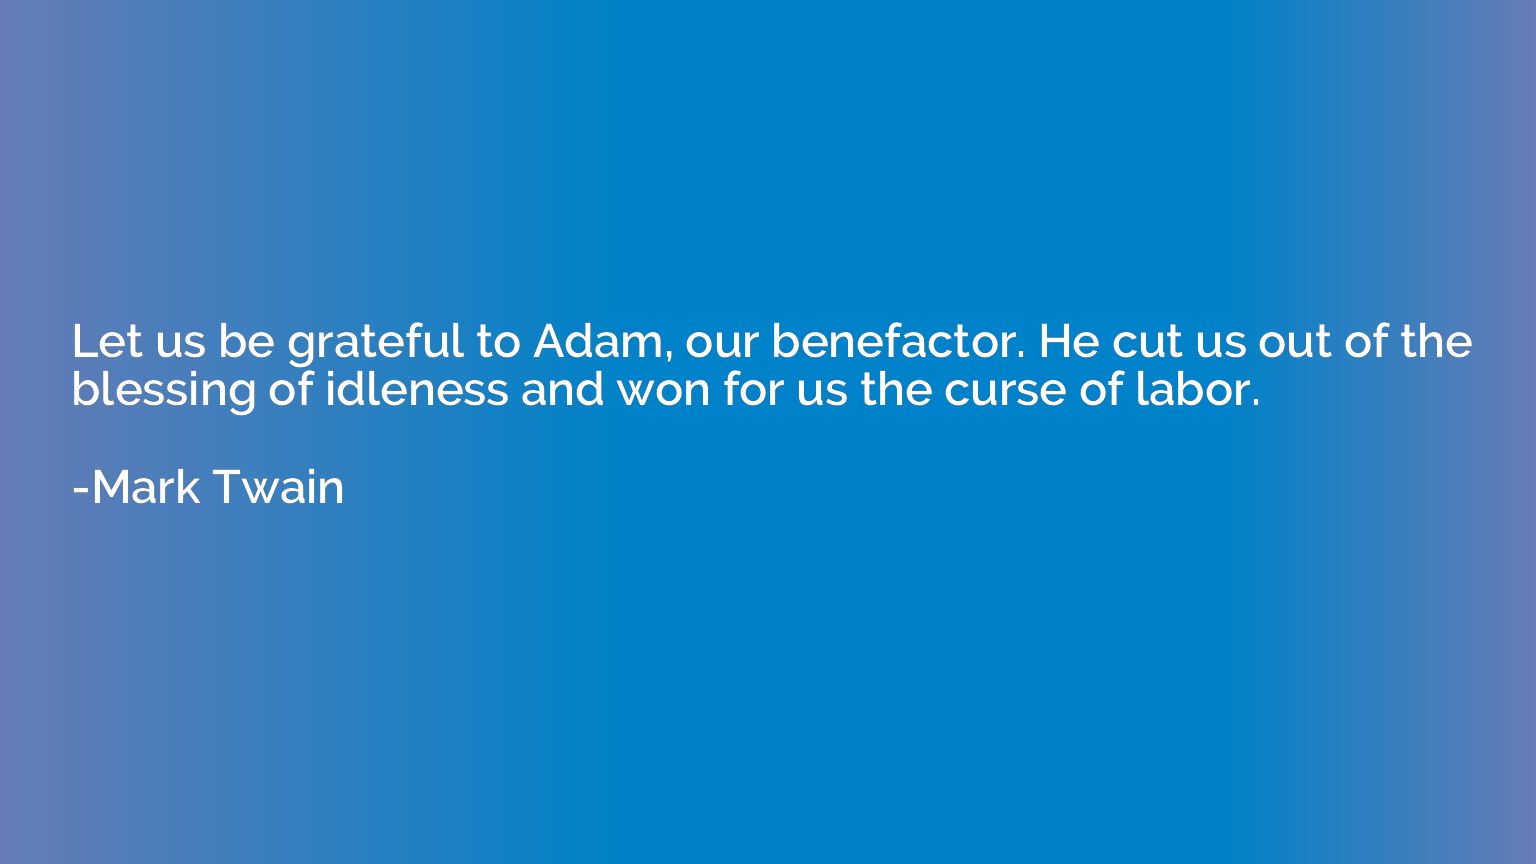 Let us be grateful to Adam, our benefactor. He cut us out of